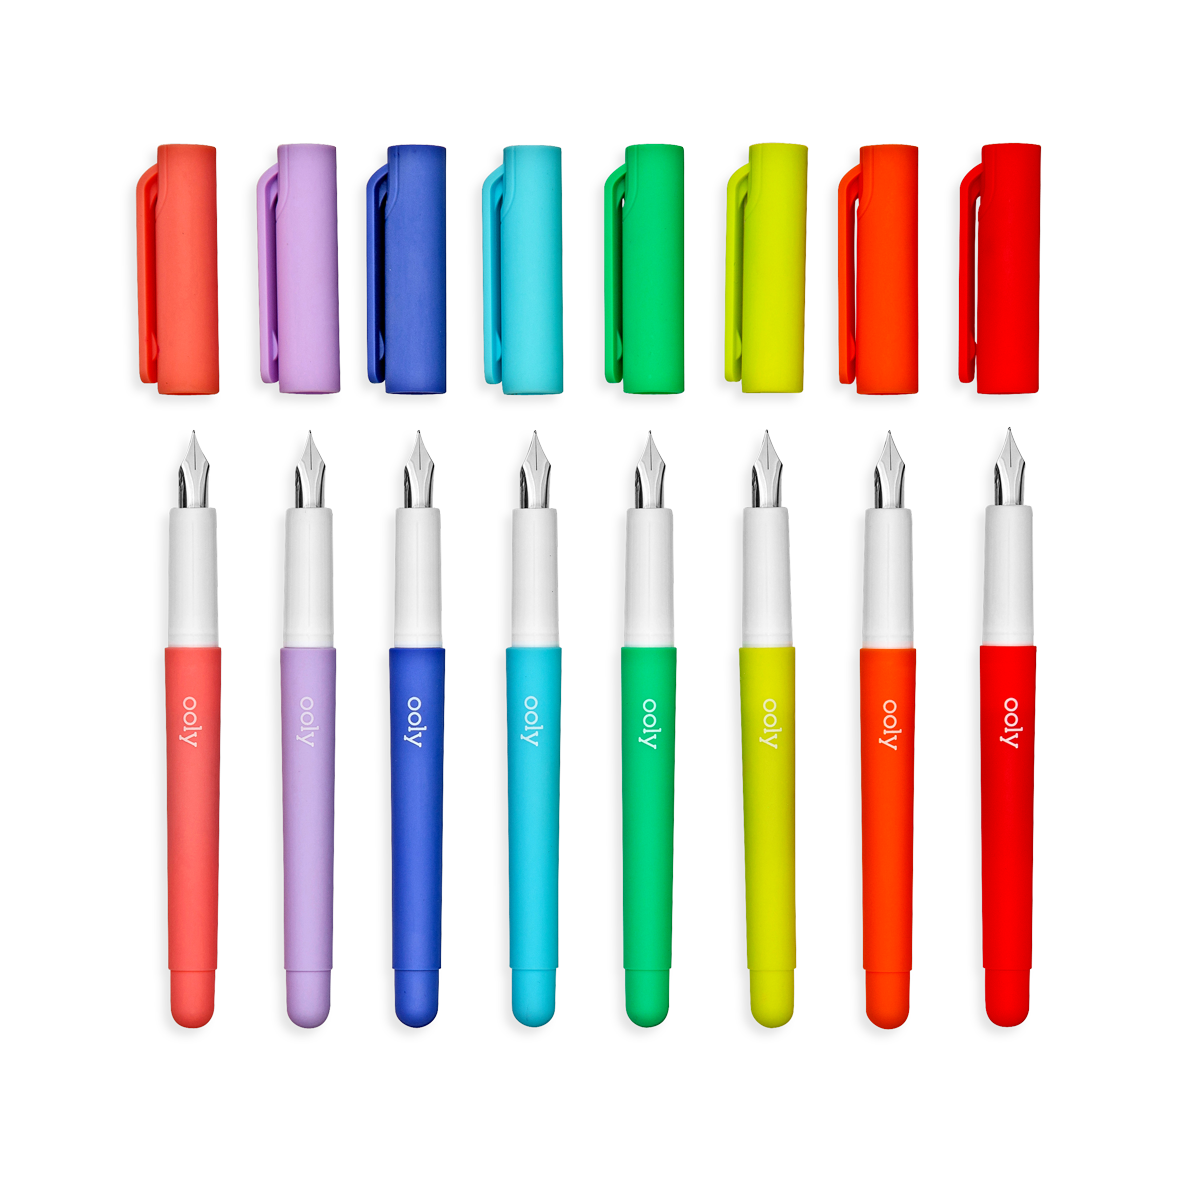 Fountain Pens: Colorful, Modern for Teen & Adults - OOLY